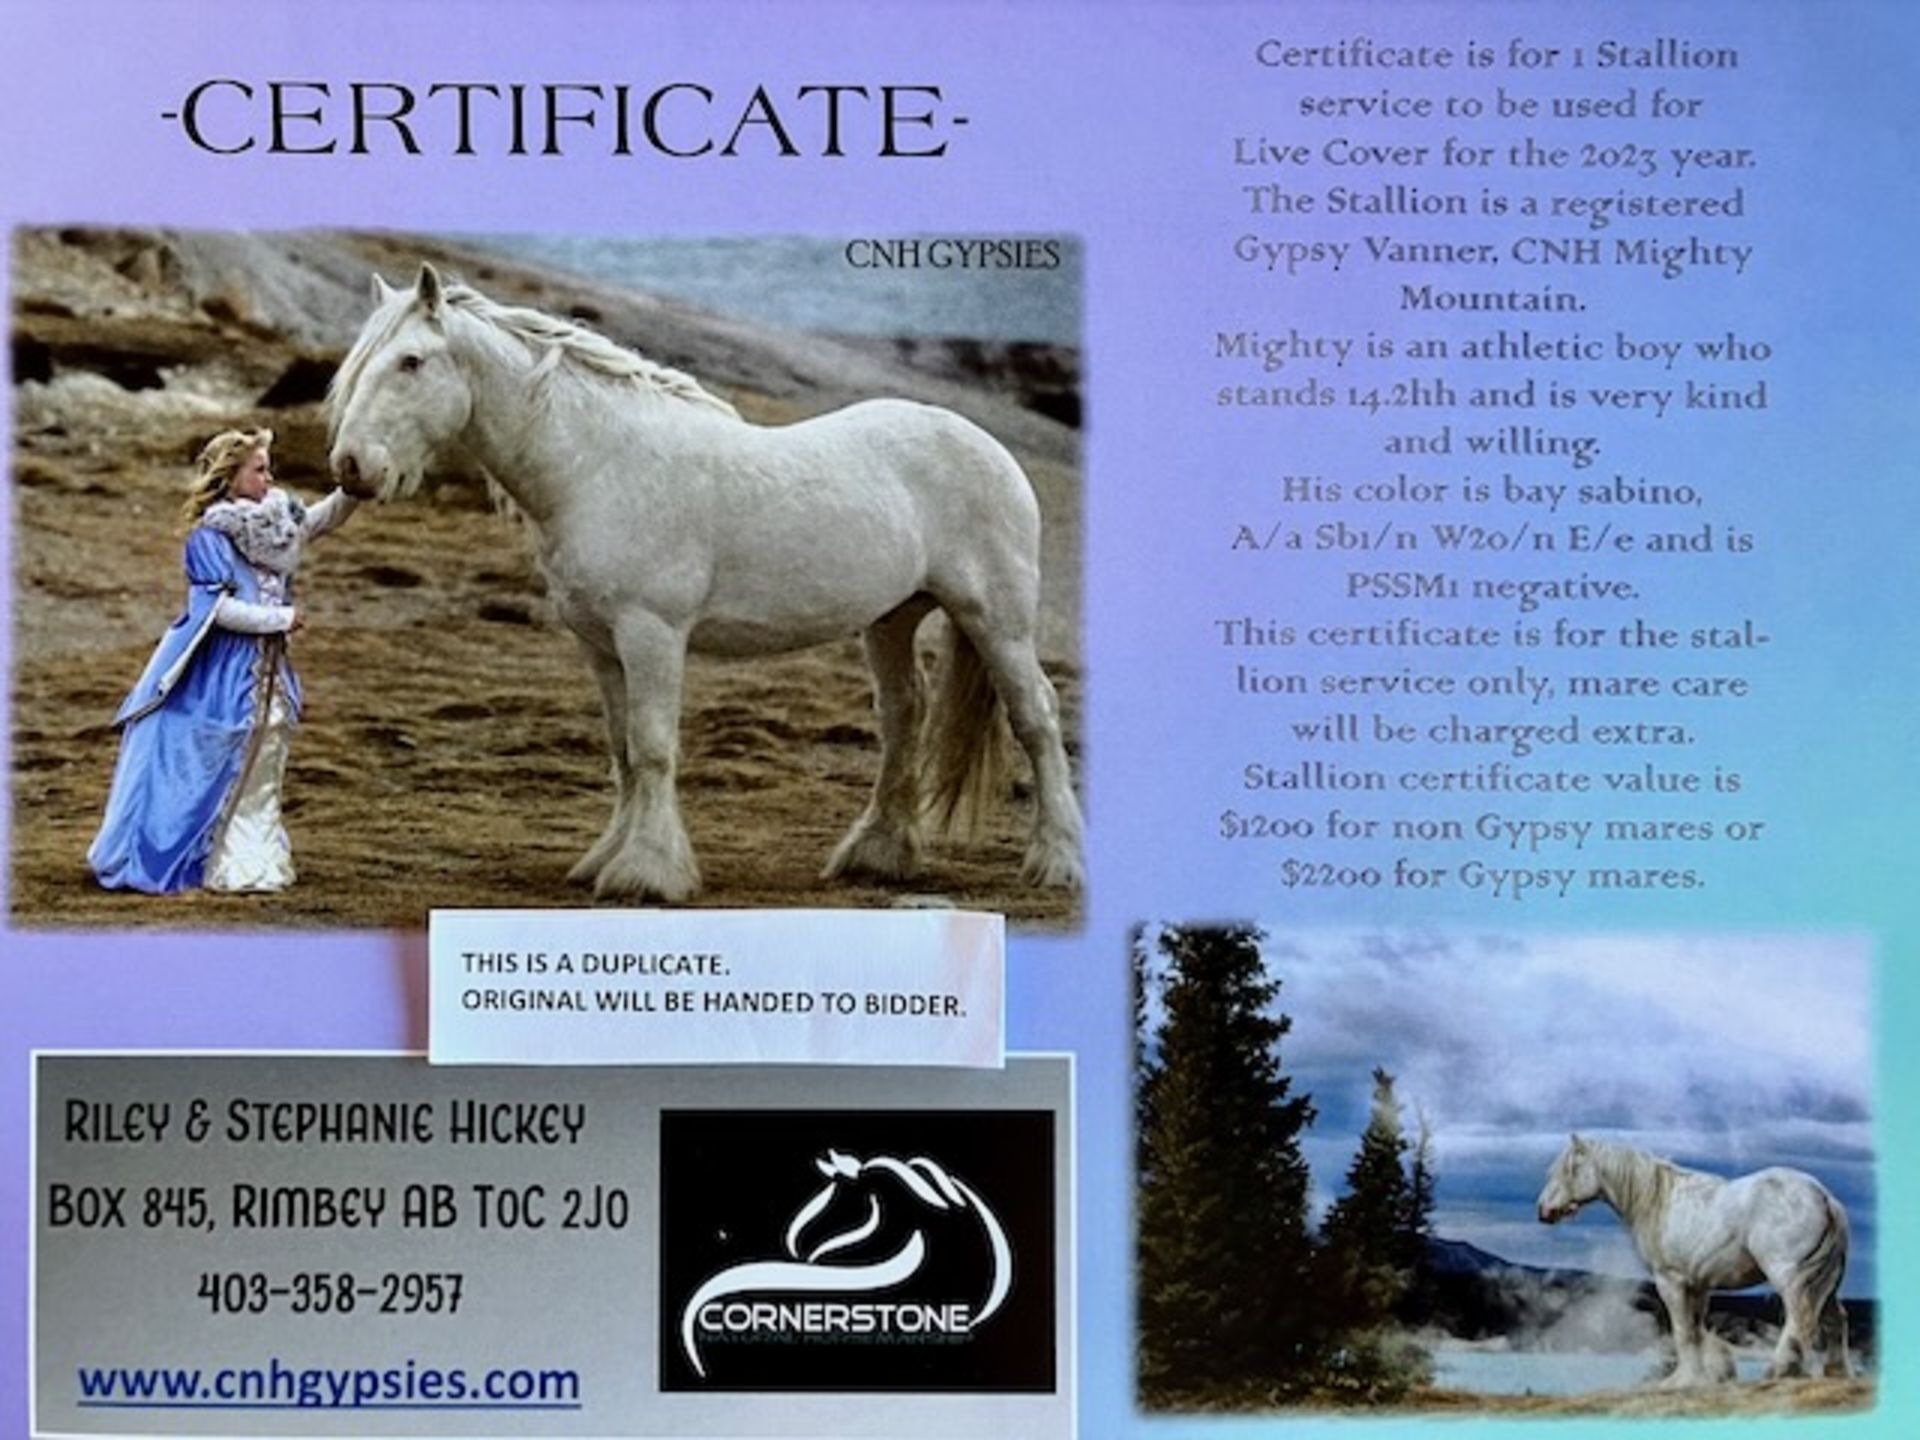 CNH GIFT CERTIFICATE FOR 1 GYPSY STALLION SERVICE (LIVE COVER ) - Image 4 of 4